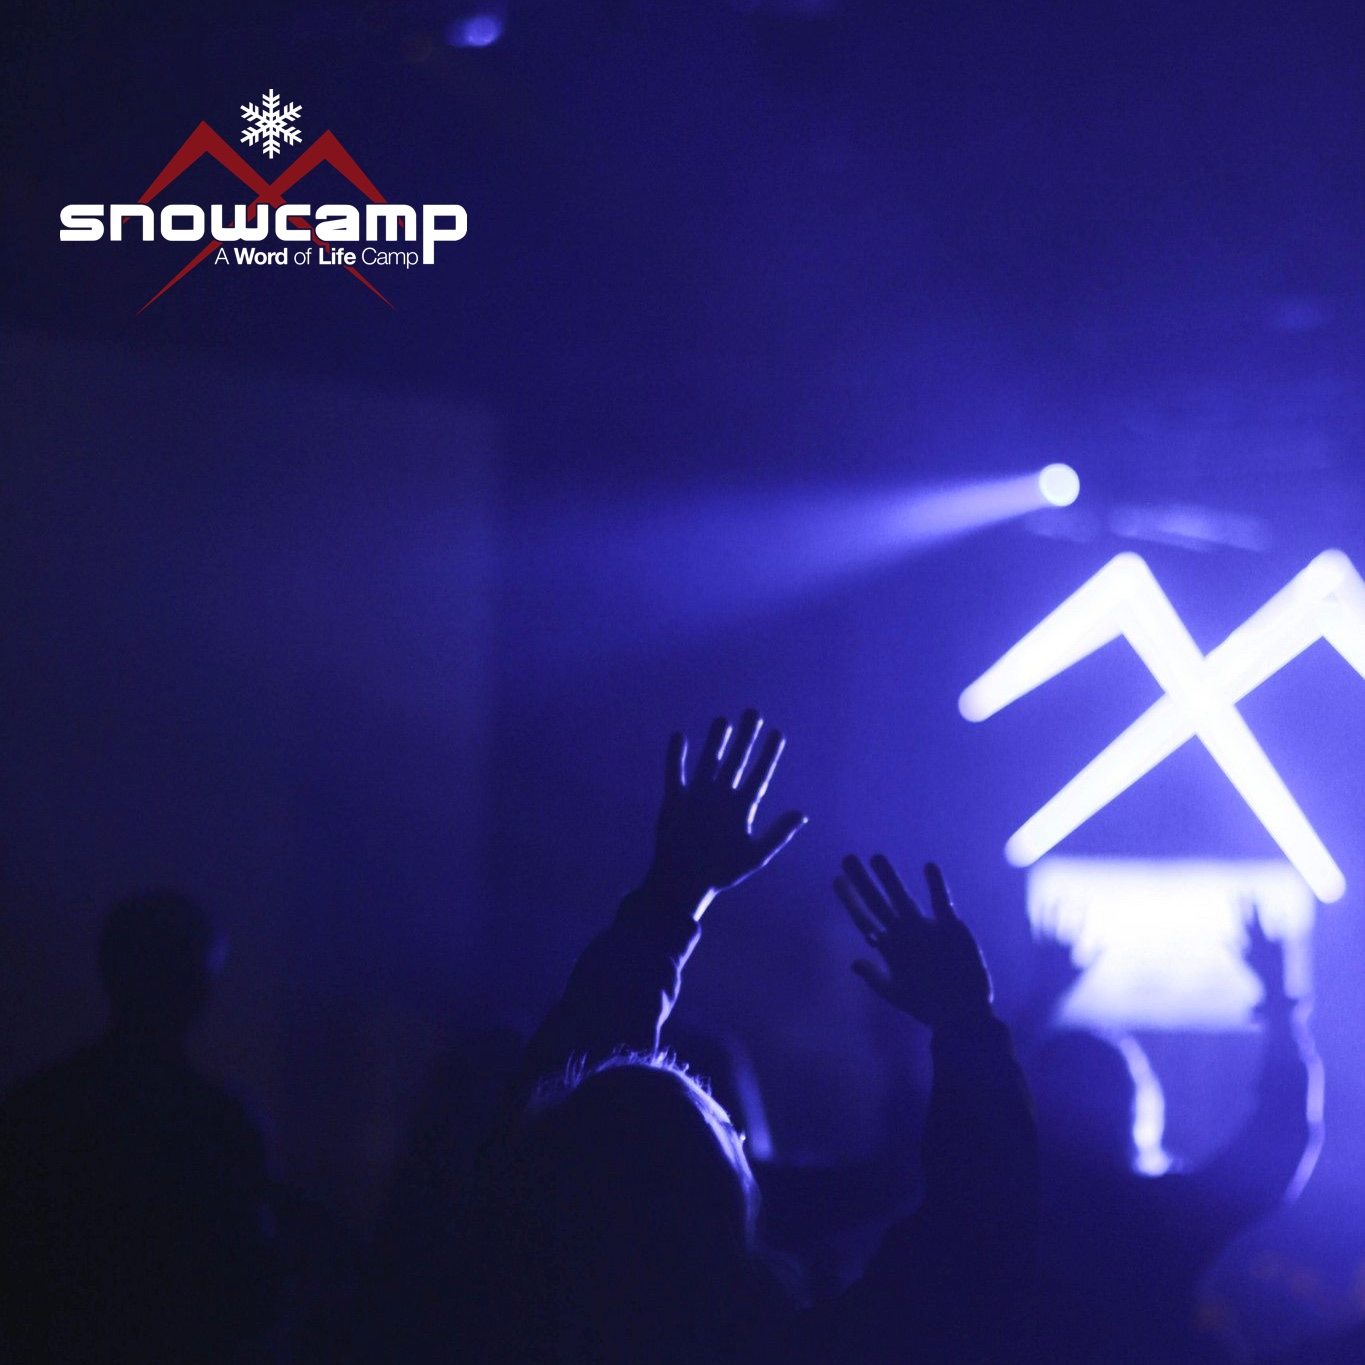 snowcamp logo with people raising their hands at a concert.